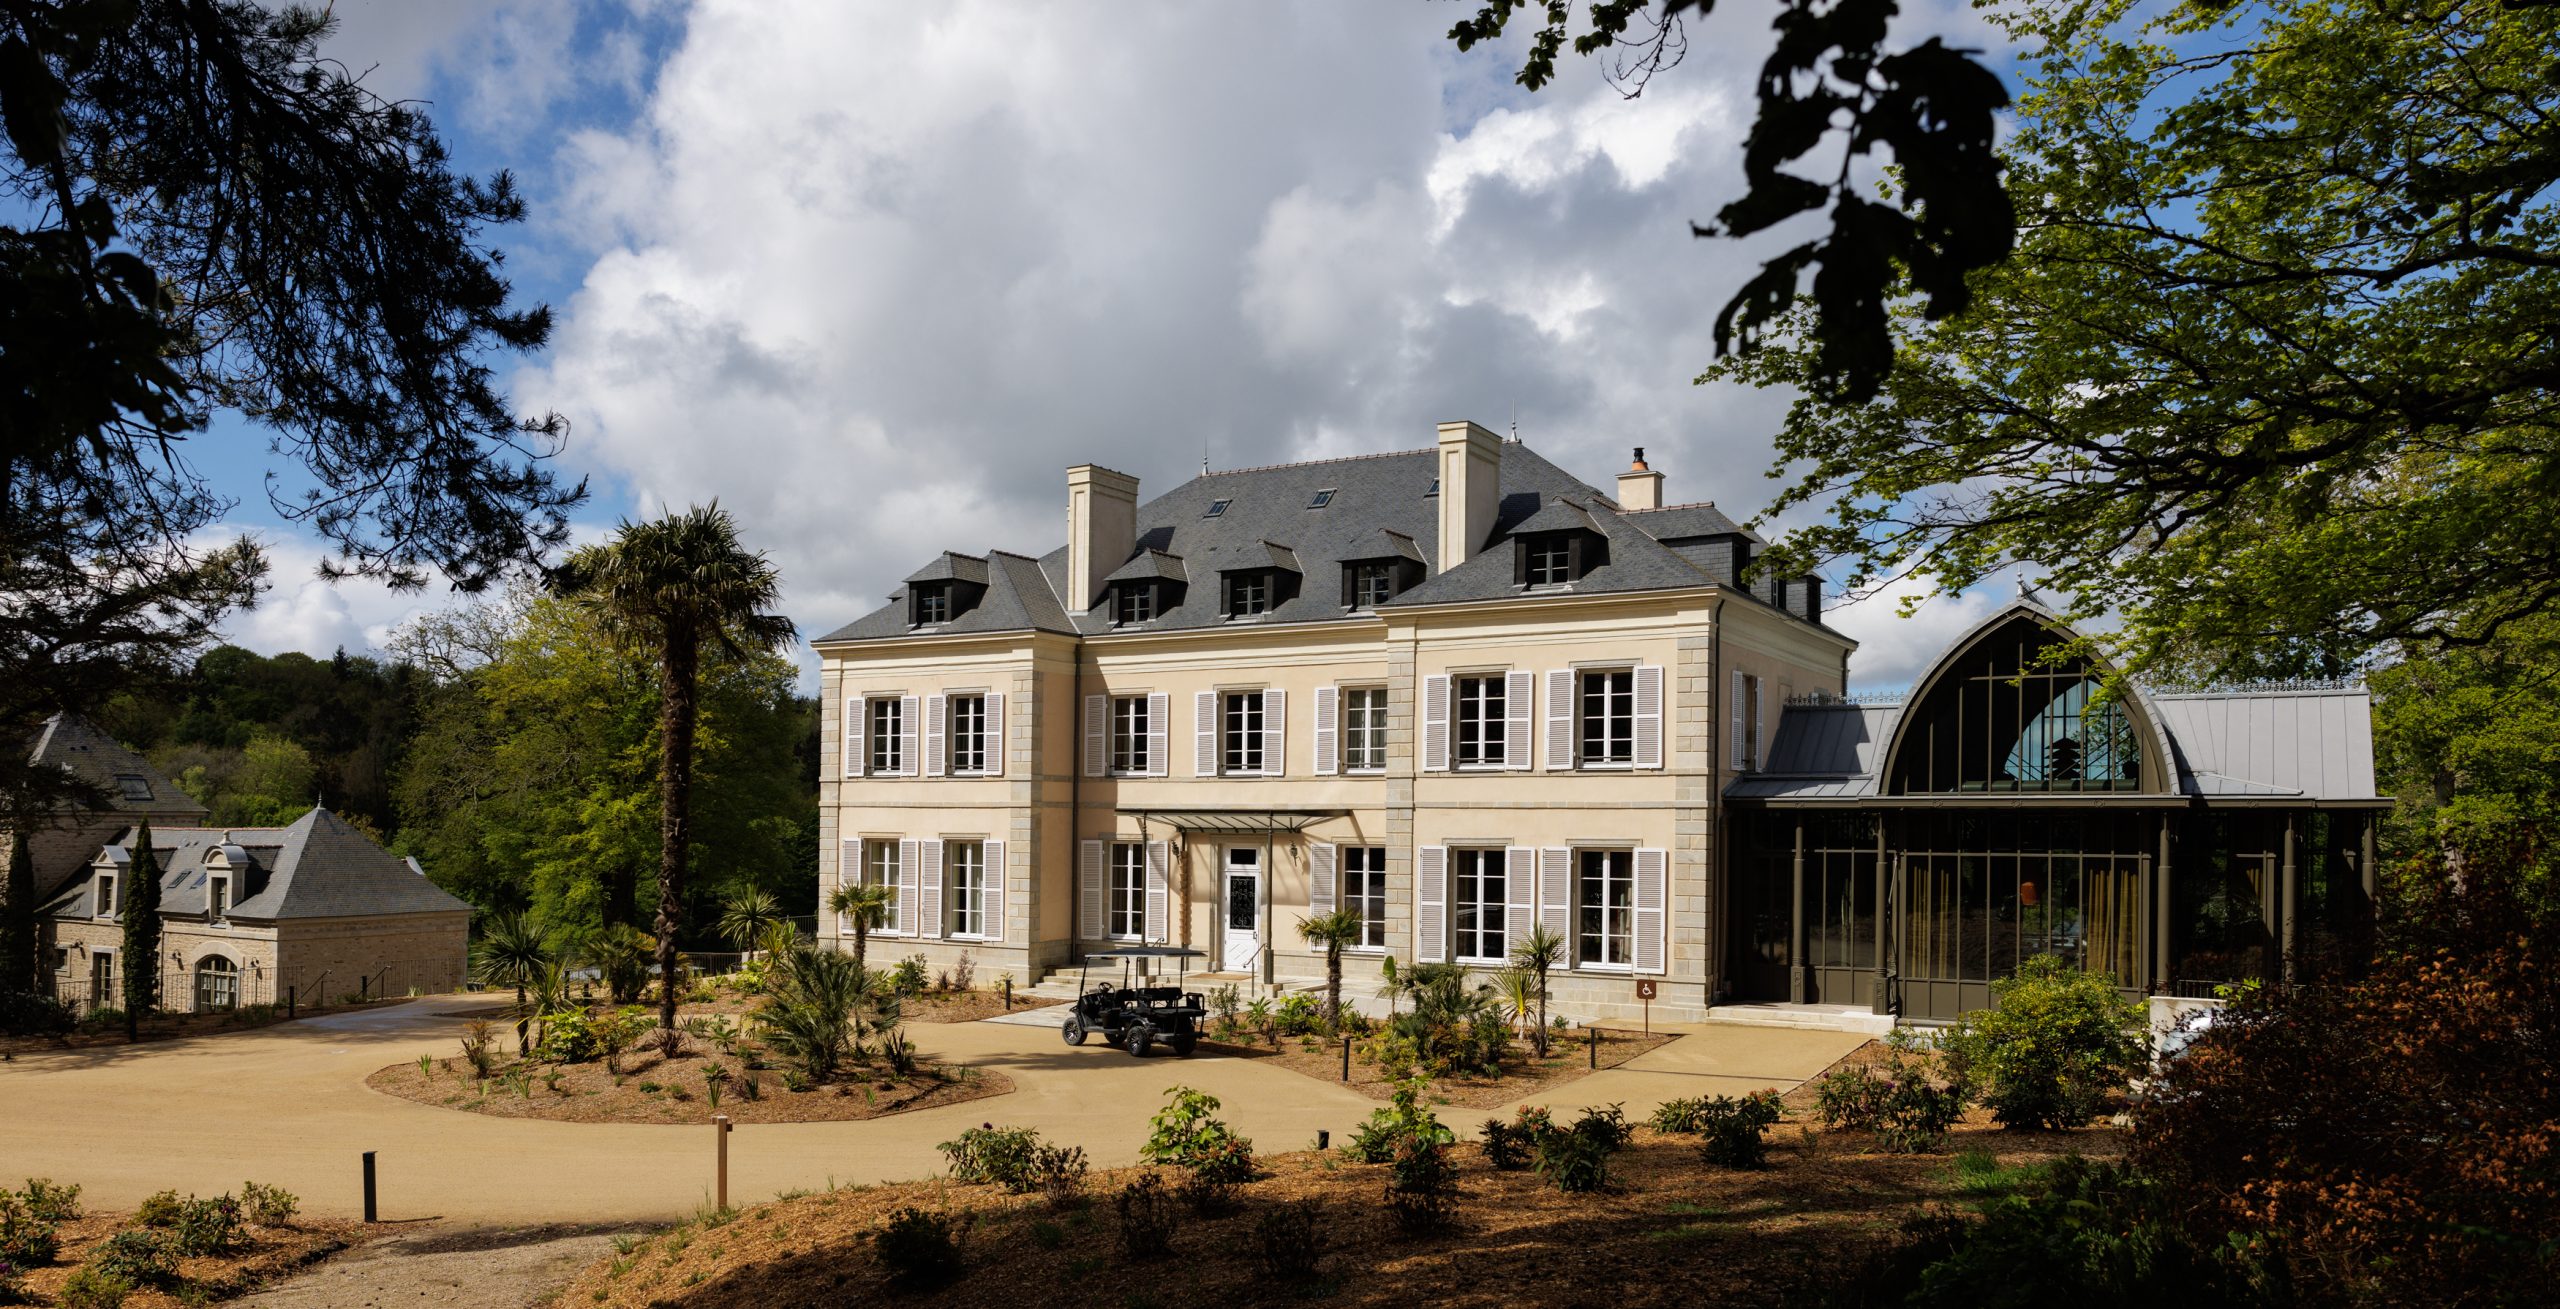 château de Locguénolé and its estate from the Beautiful Life Hotels group to provide you with beautiful reception rooms in morbihan